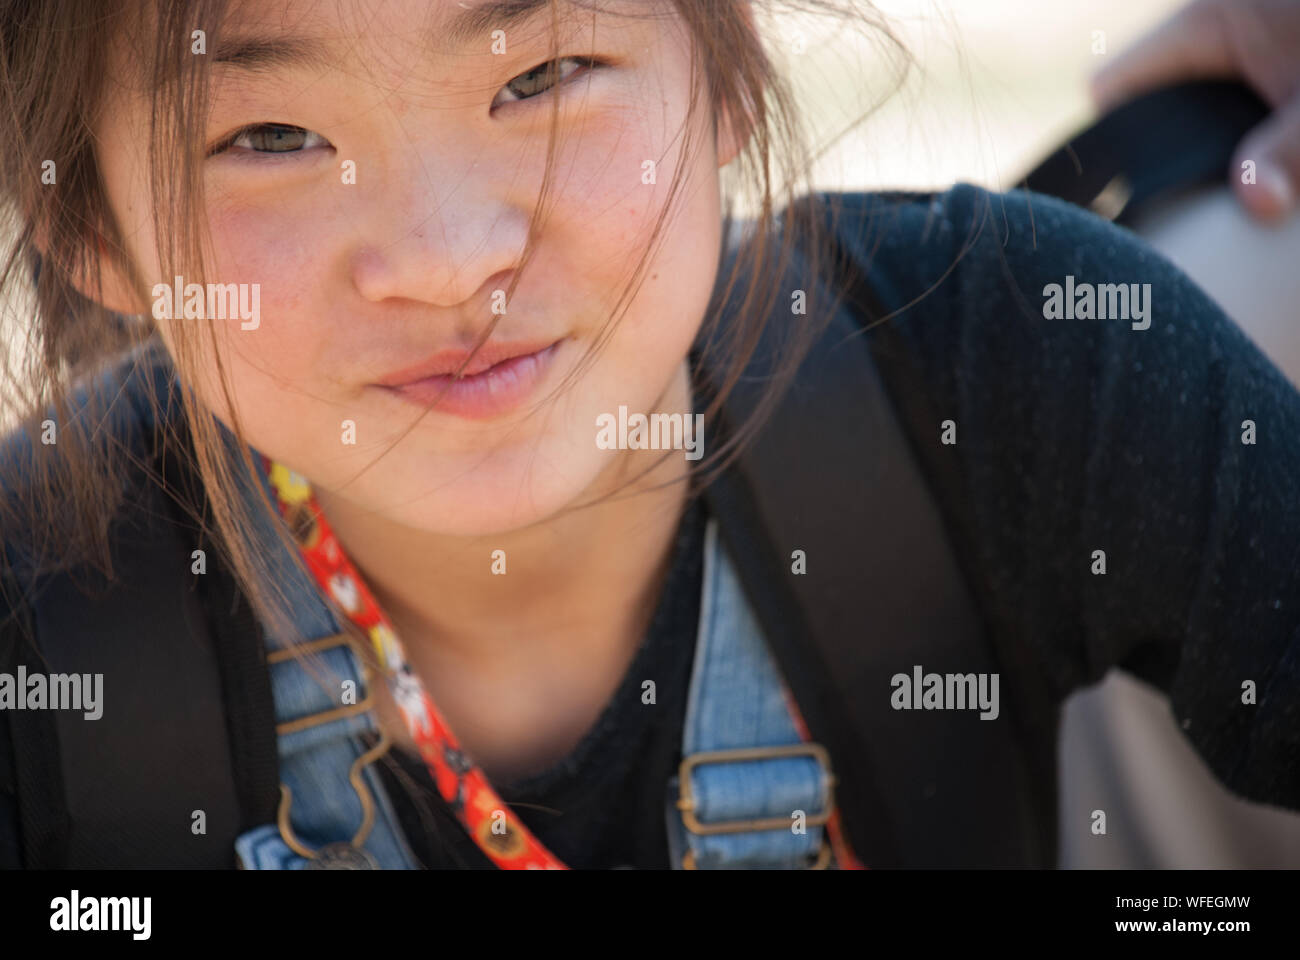 Close-up Portrait Of Smiling Pre-adolescent Girl Stock Photo